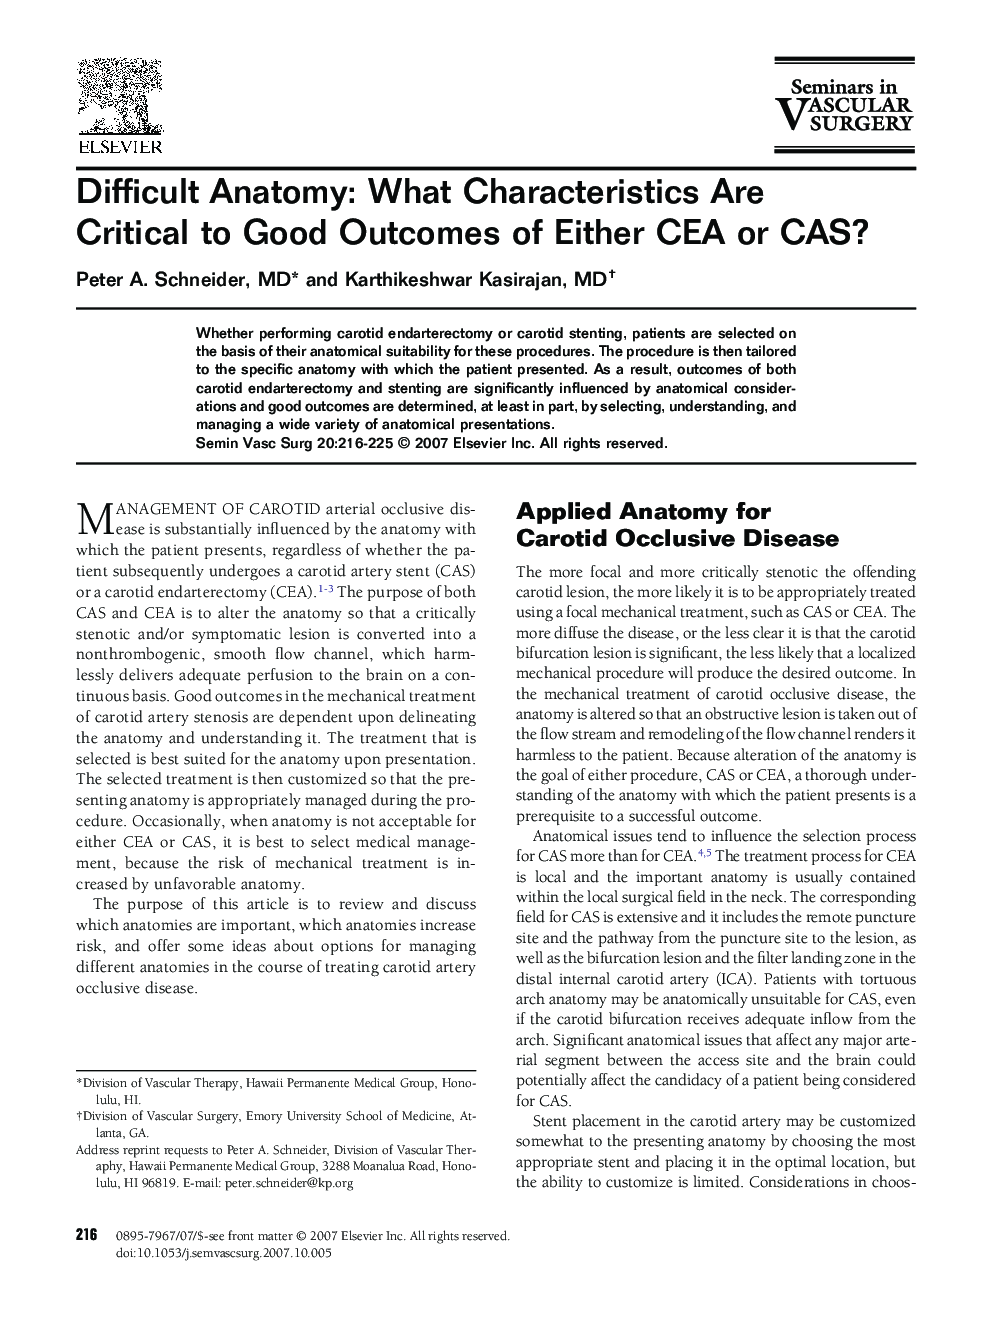 Difficult Anatomy: What Characteristics Are Critical to Good Outcomes of Either CEA or CAS?